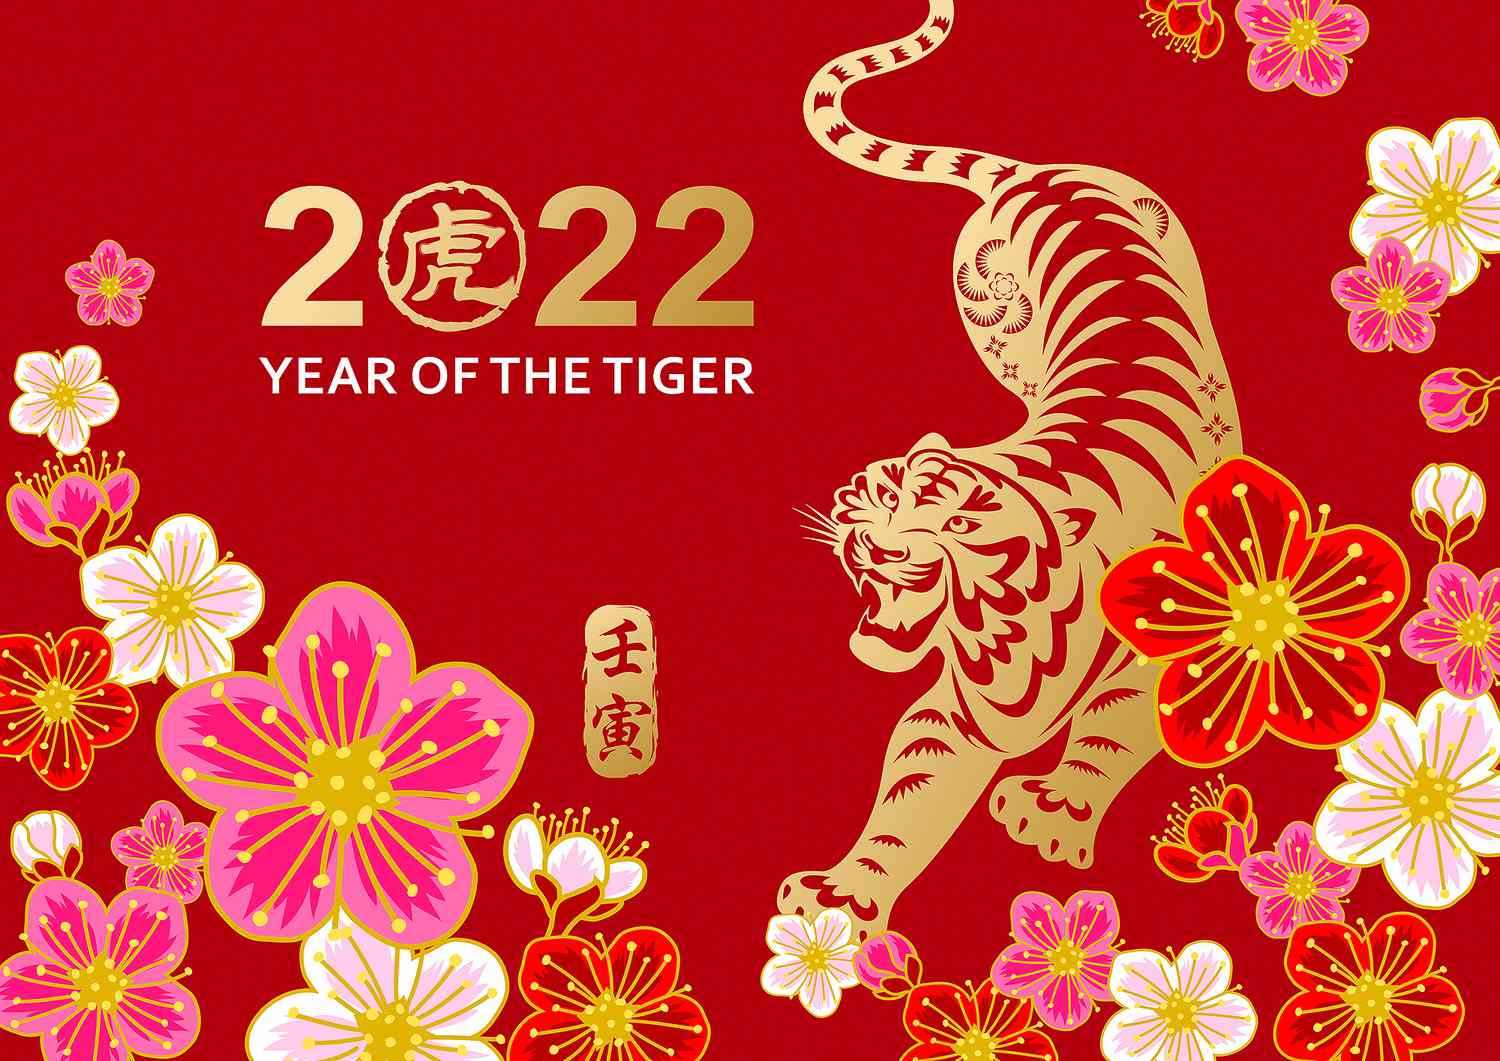 year of the tiger